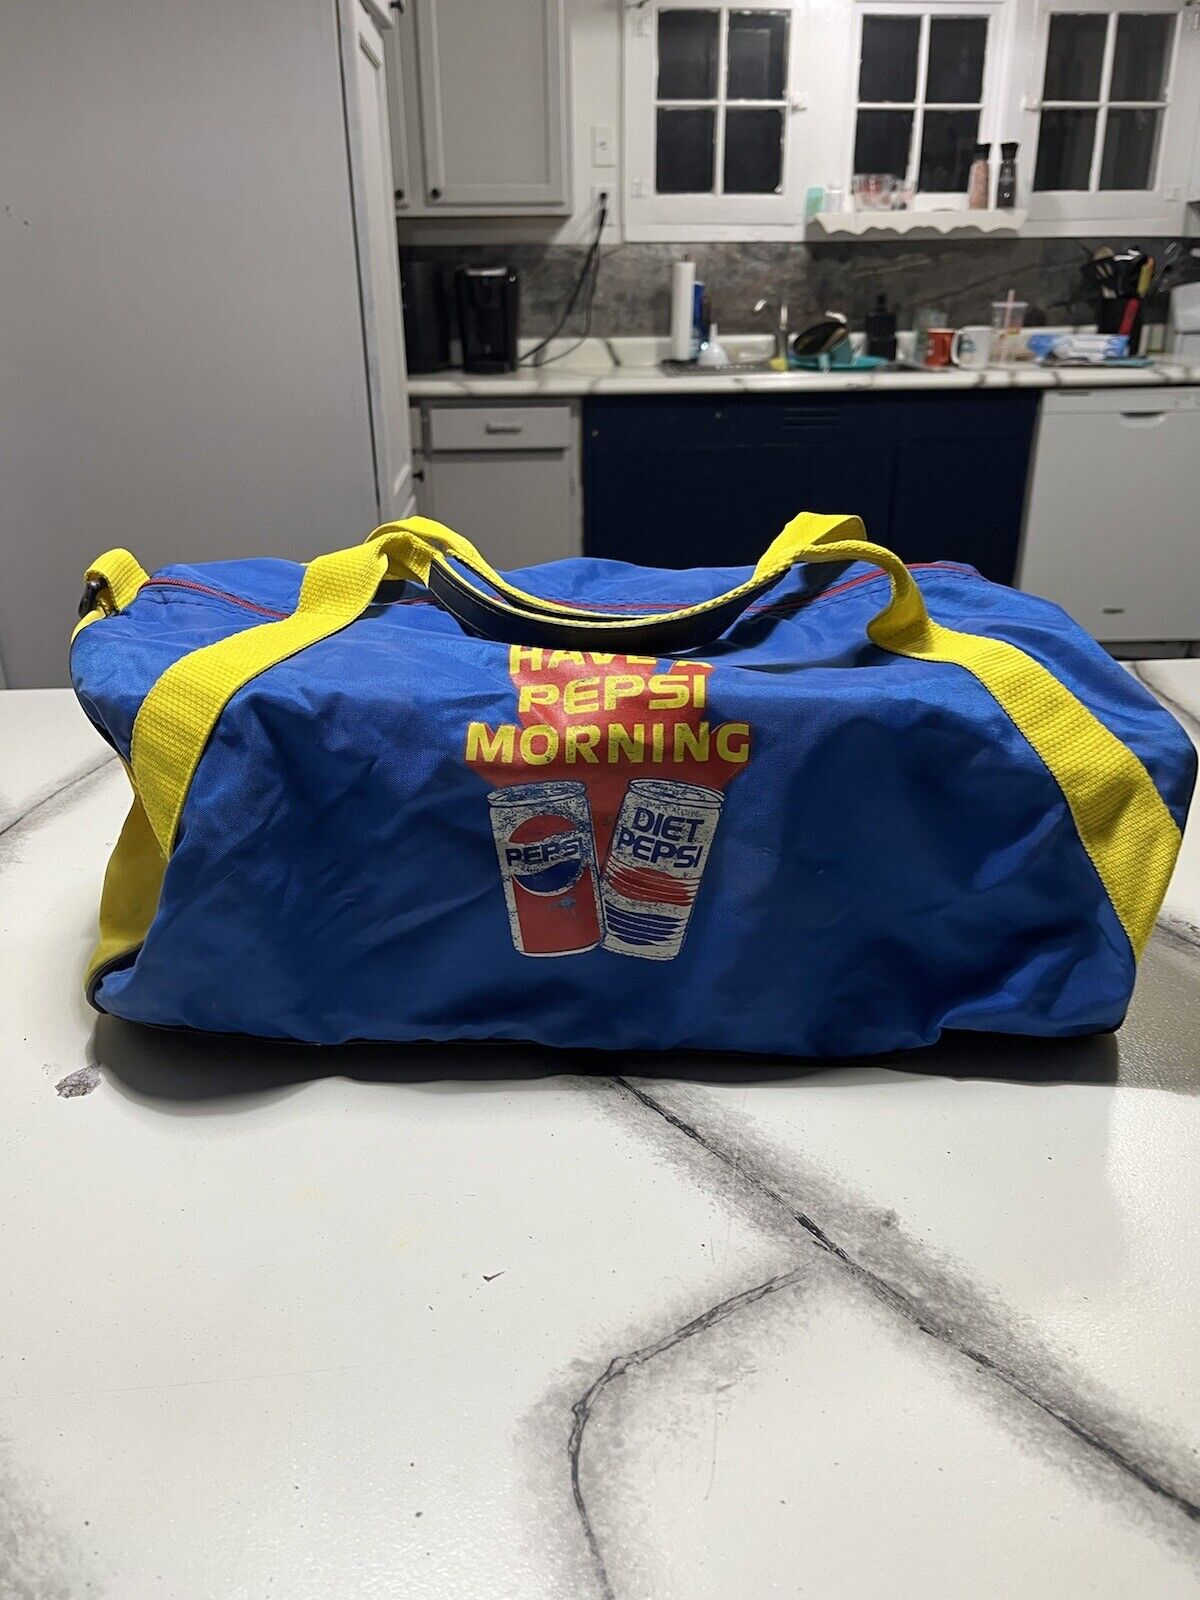 VINTAGE DIET PEPSI GYM DUFFLE BAG HAVE A PEPSI MORNING BLUE YELLOW RED